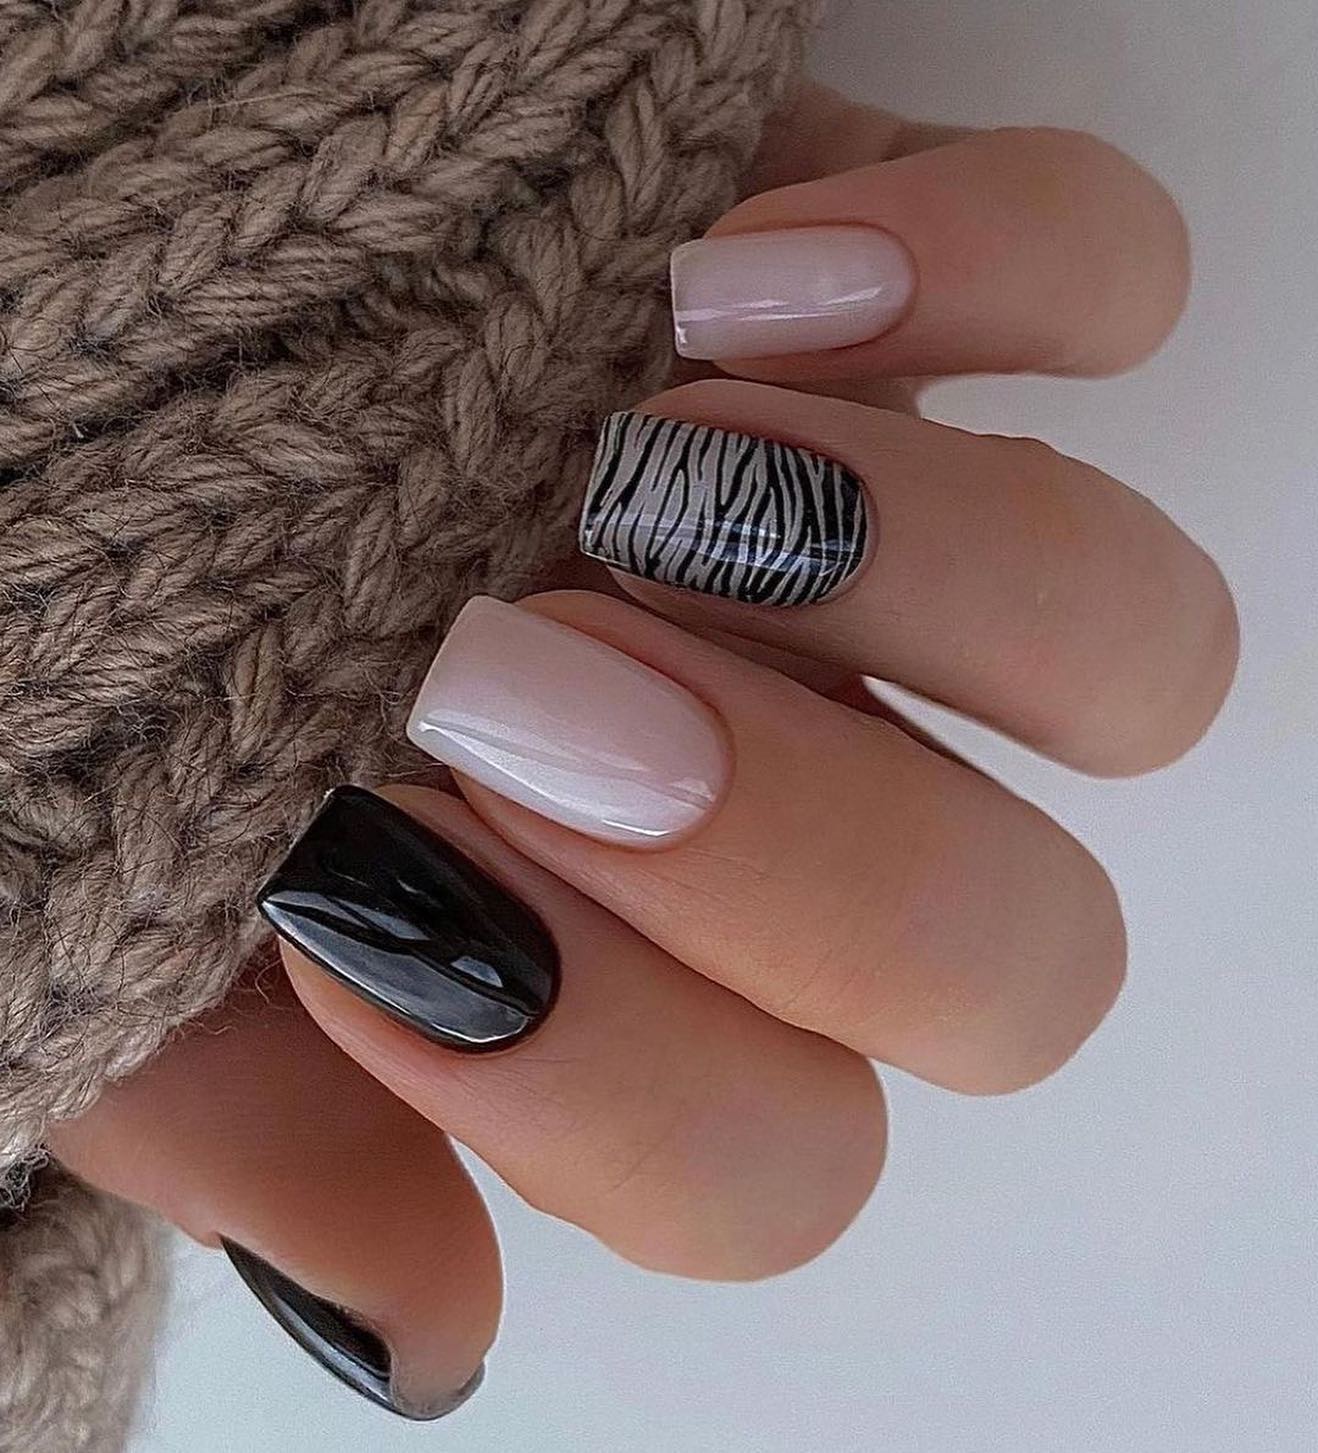 100+ Best Winter Nail Ideas And Designs To Try images 48